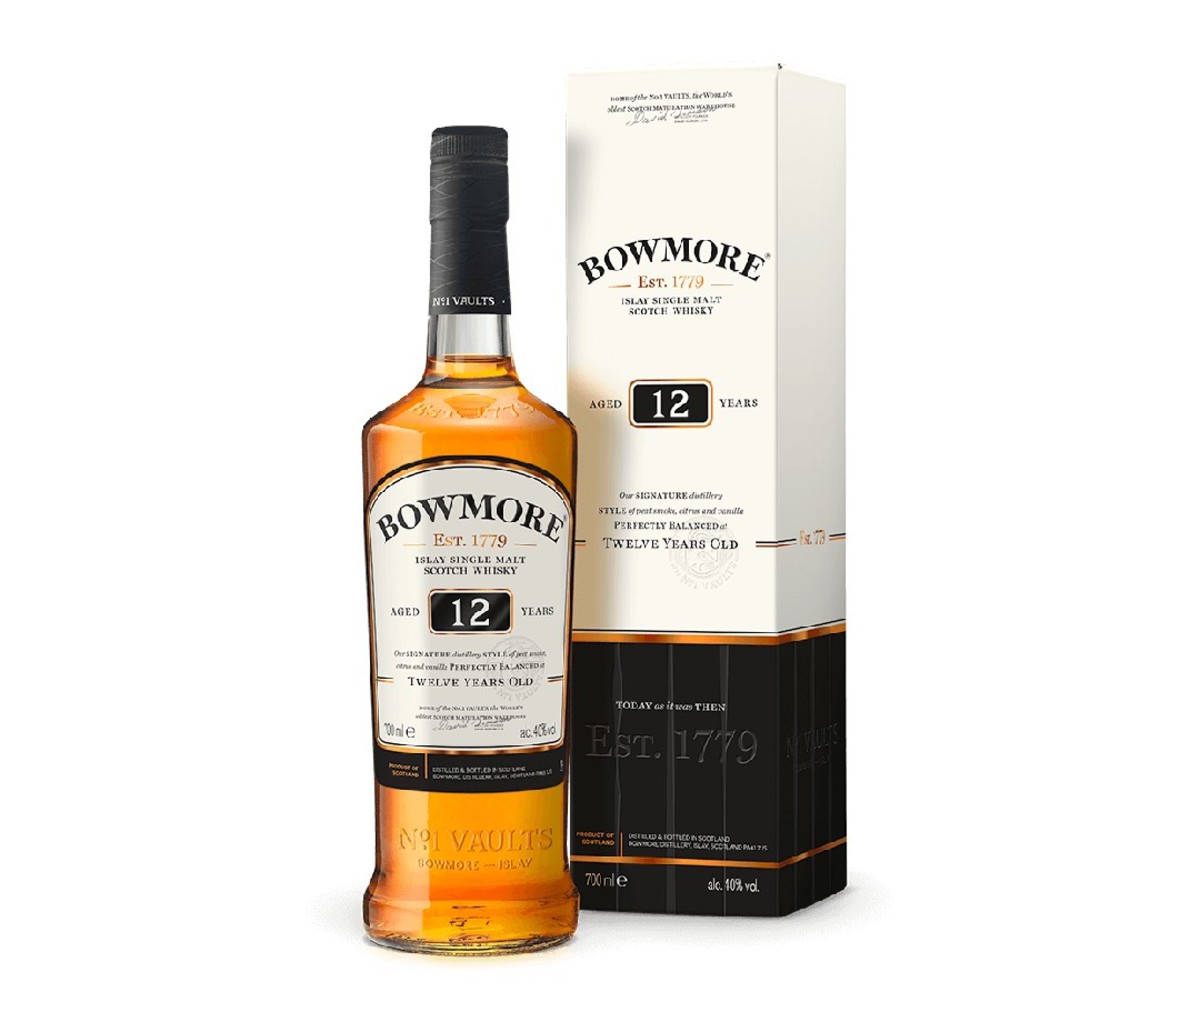 Bottle of Bowmore 12 whisky